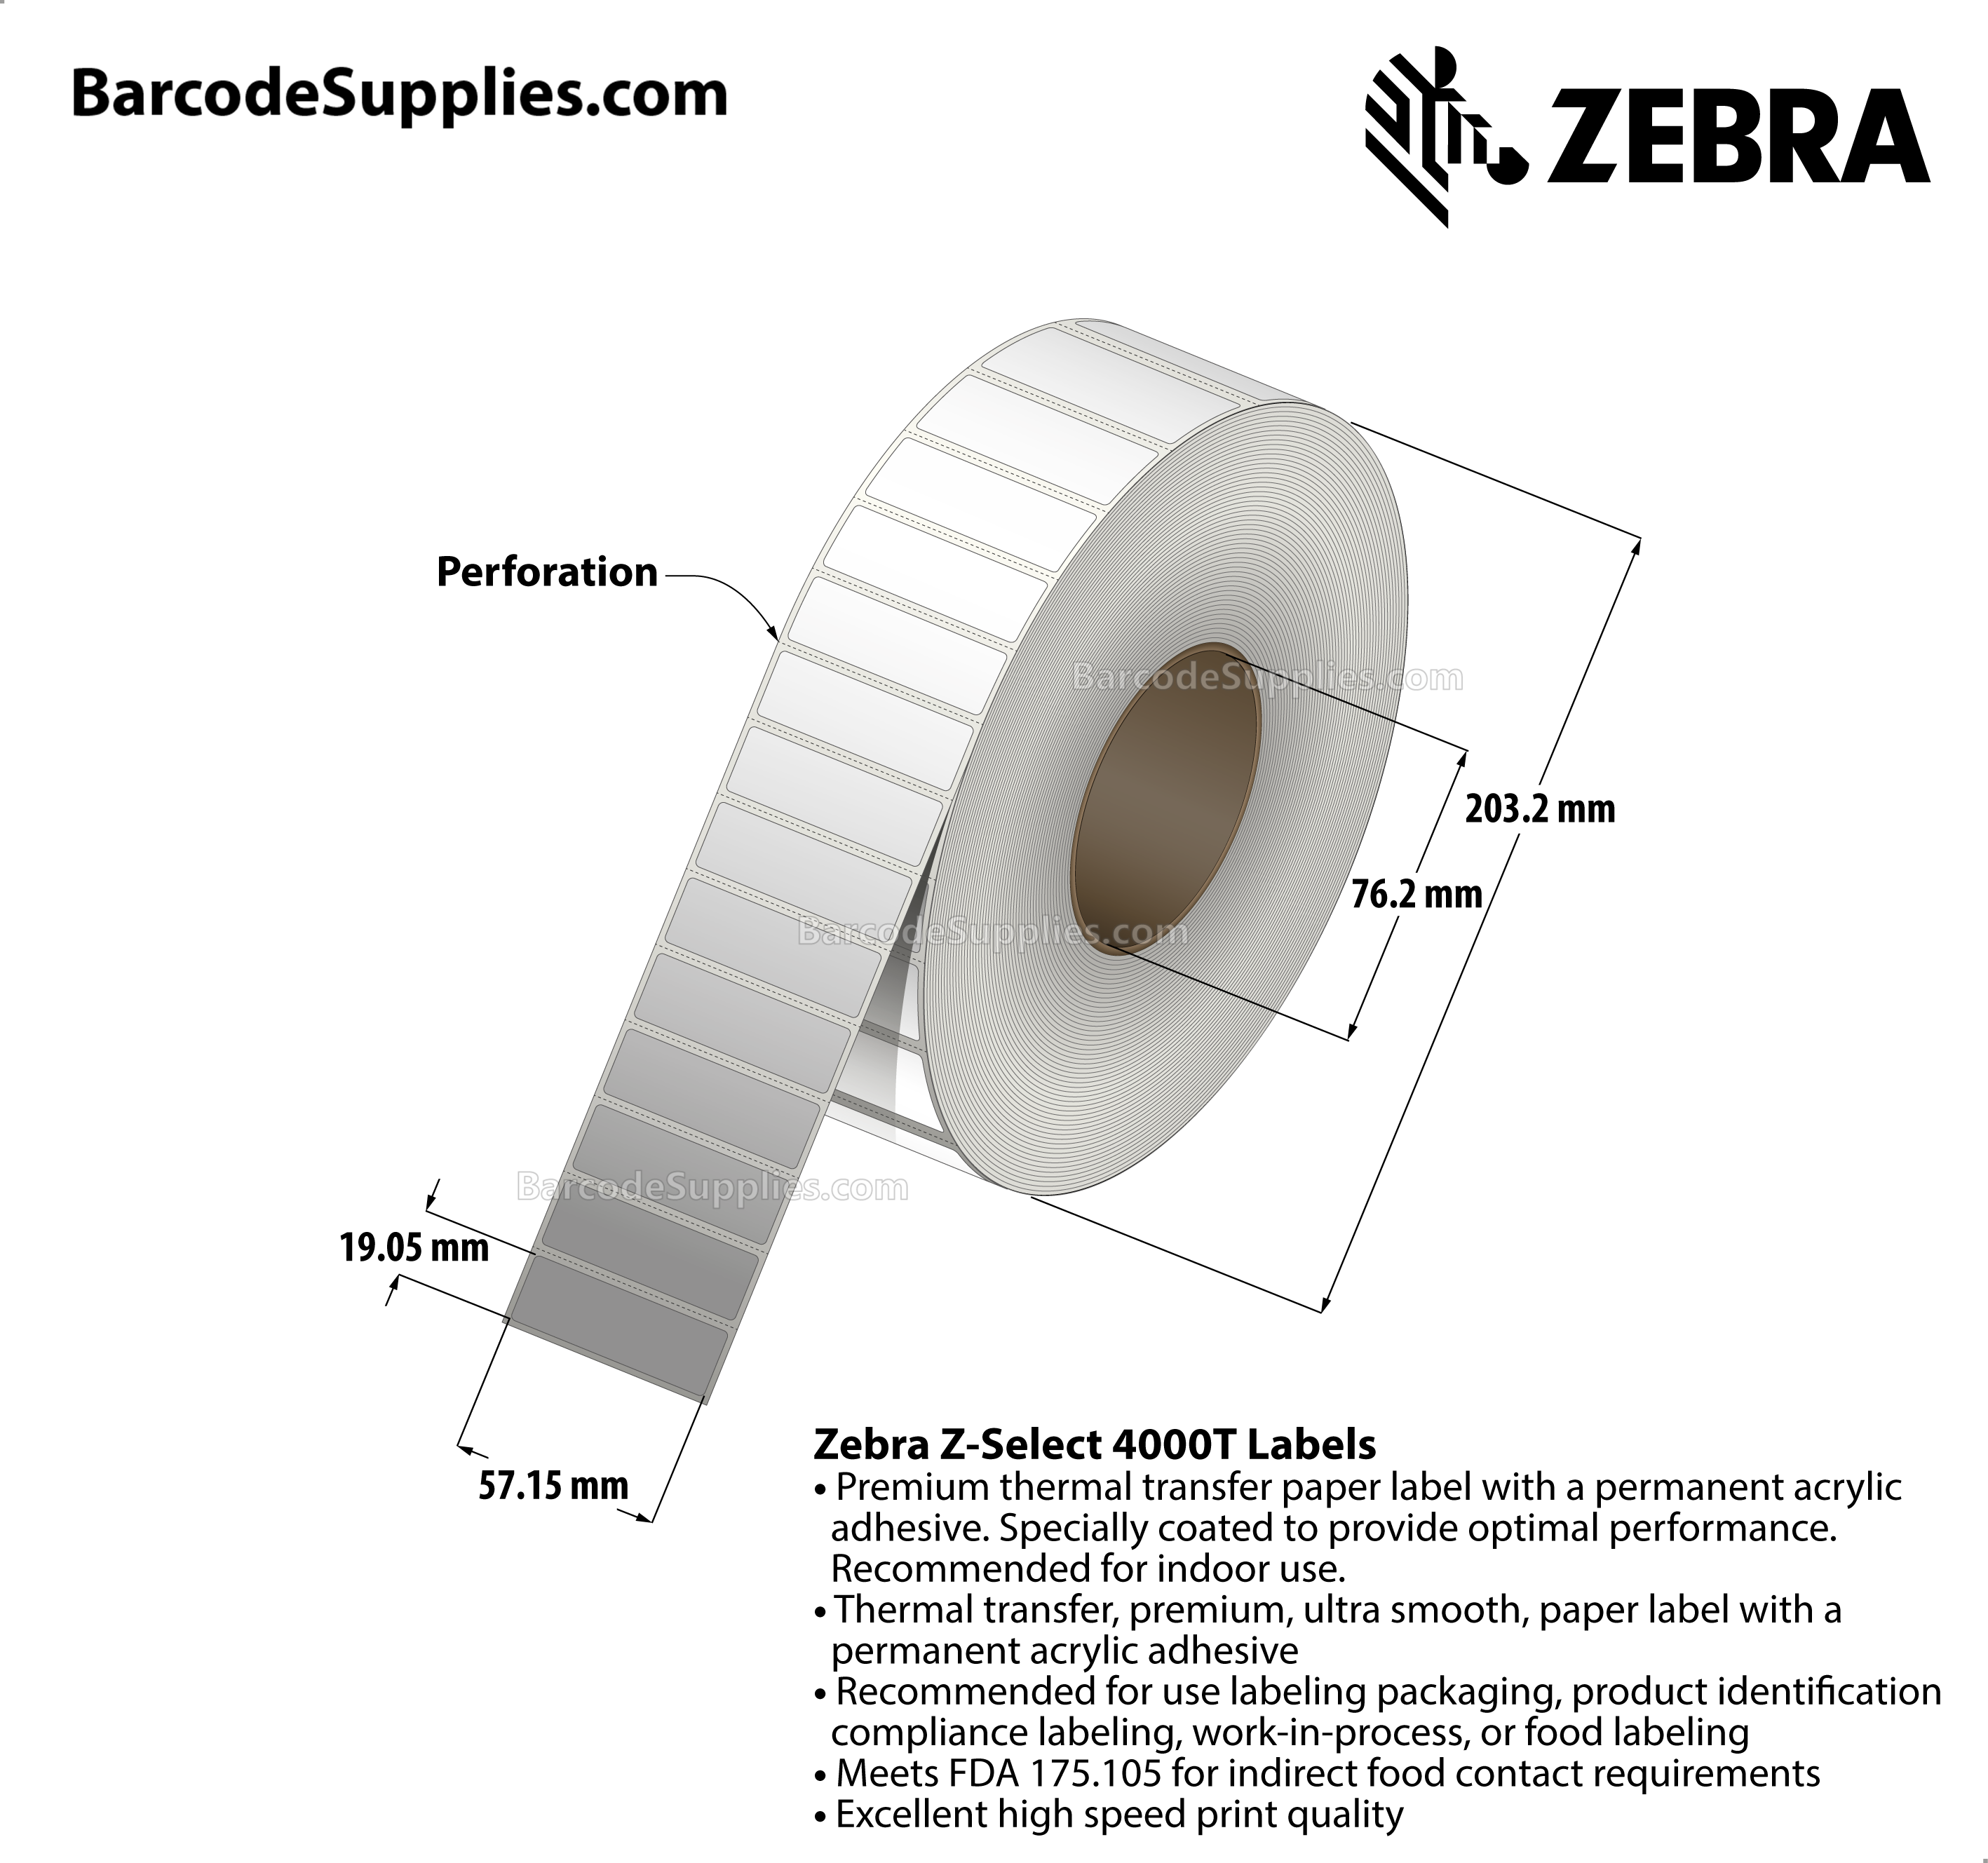 2.25 x 0.75 Thermal Transfer White Z-Select 4000T Labels With Permanent Adhesive - Perforated - 7995 Labels Per Roll - Carton Of 4 Rolls - 31980 Labels Total - MPN: 800622-075